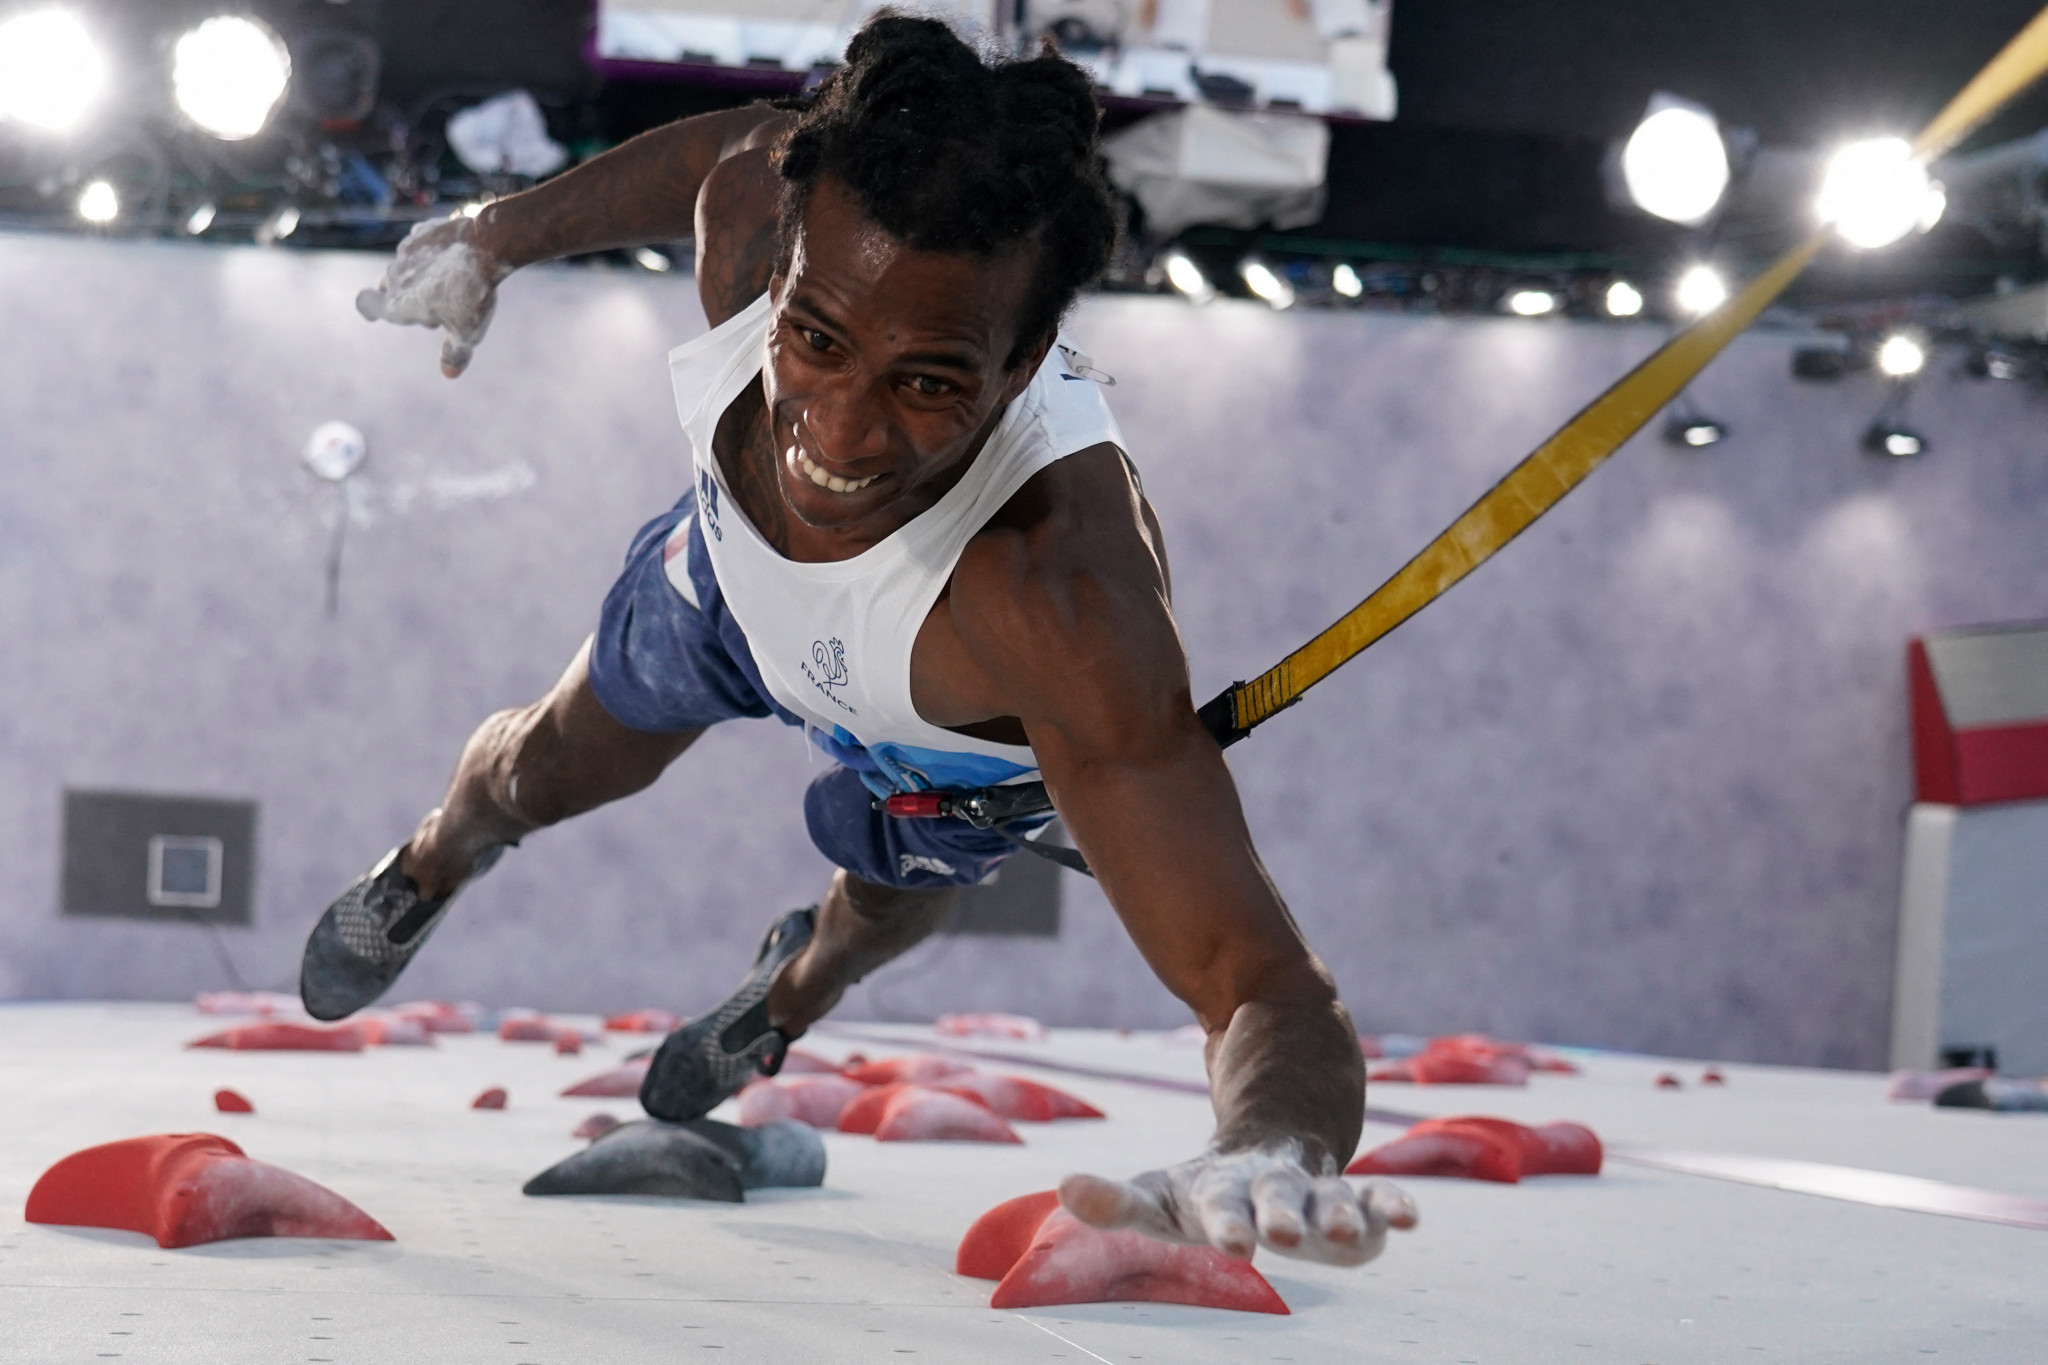 Sport climbing will offer twice as many medals at Paris 2024 versus Tokyo 2020 ©Getty Images